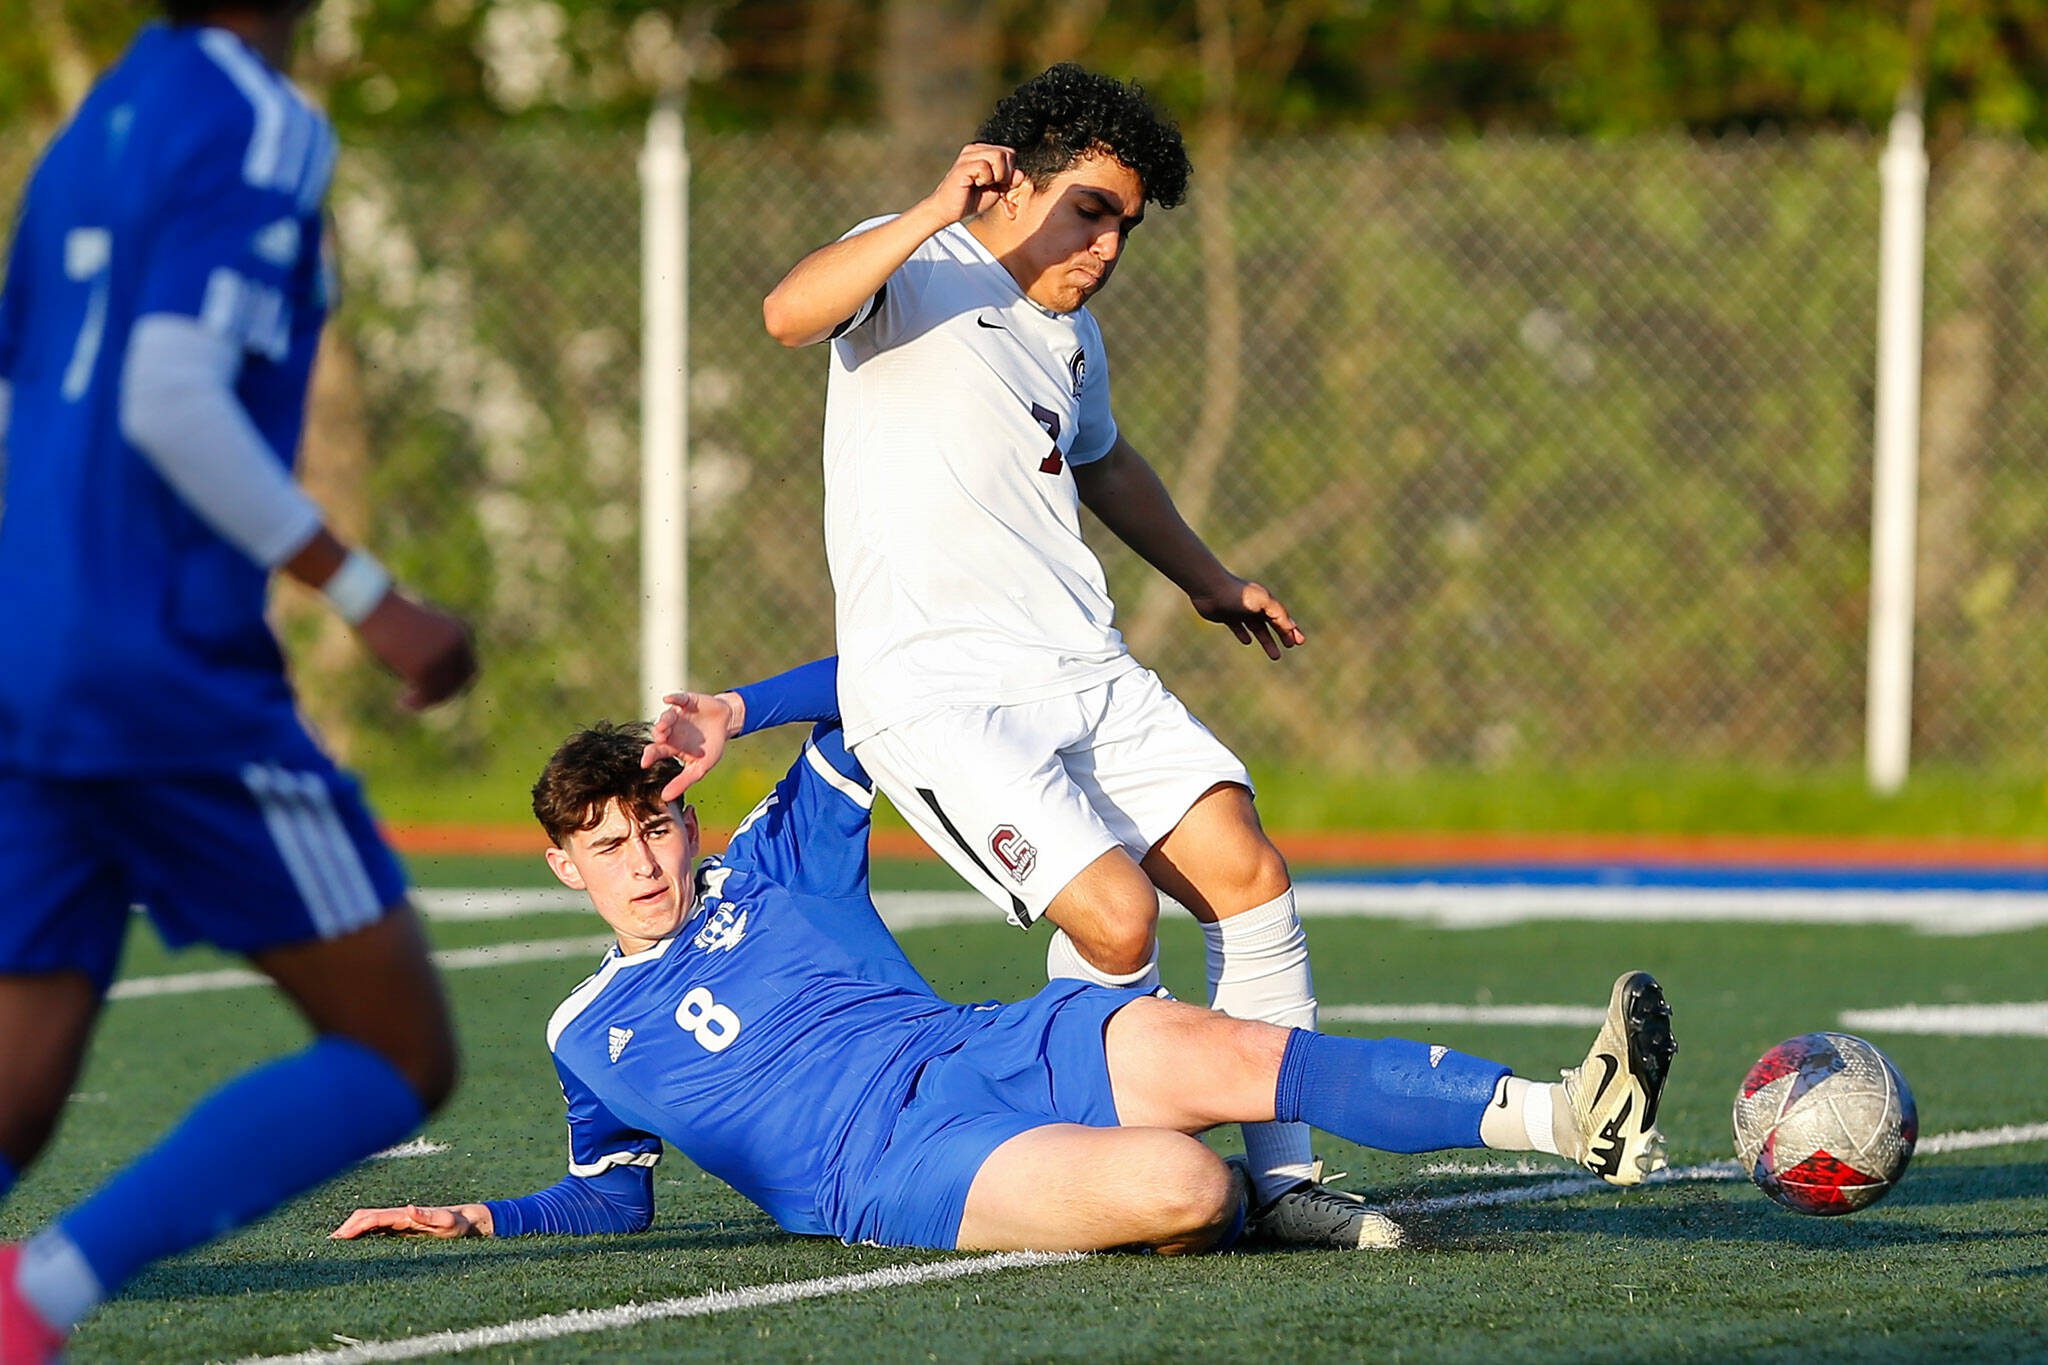 Shorewood’s Nikola Genadiev tackles the ball away from Cascade’s Asios Corona Martinez during a boys soccer match on April 22, at Shoreline Stadium. The Class 4A and Class 3A district tournaments begin Thursday. (Ryan Berry / The Herald)